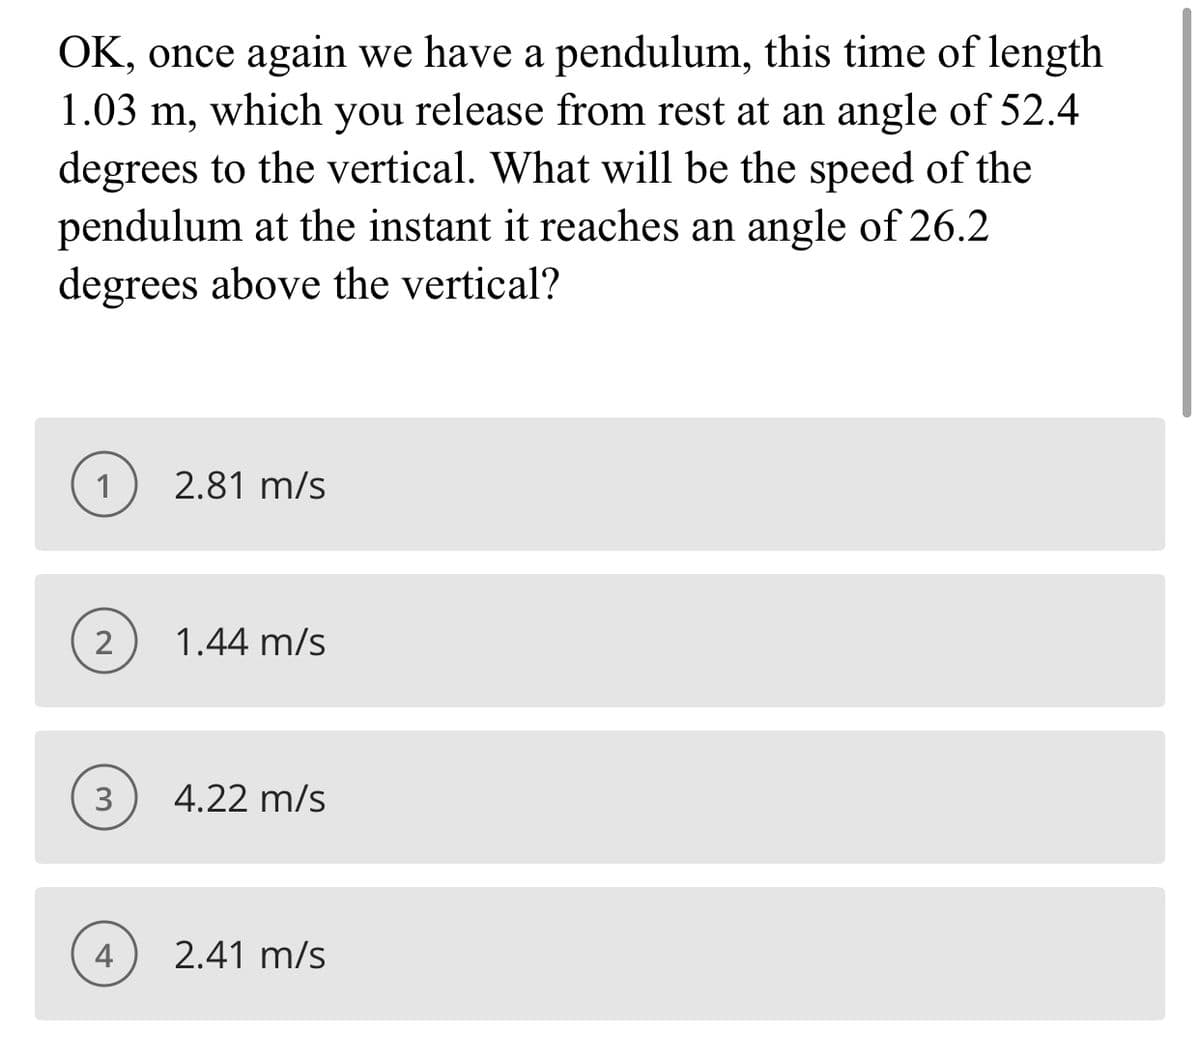 OK, once again we have a pendulum, this time of length
1.03 m, which you release from rest at an angle of 52.4
degrees to the vertical. What will be the speed of the
pendulum at the instant it reaches an angle of 26.2
degrees above the vertical?
6-
1
2.81 m/s
2
1.44 m/s
3
4.22 m/s
4
2.41 m/s
